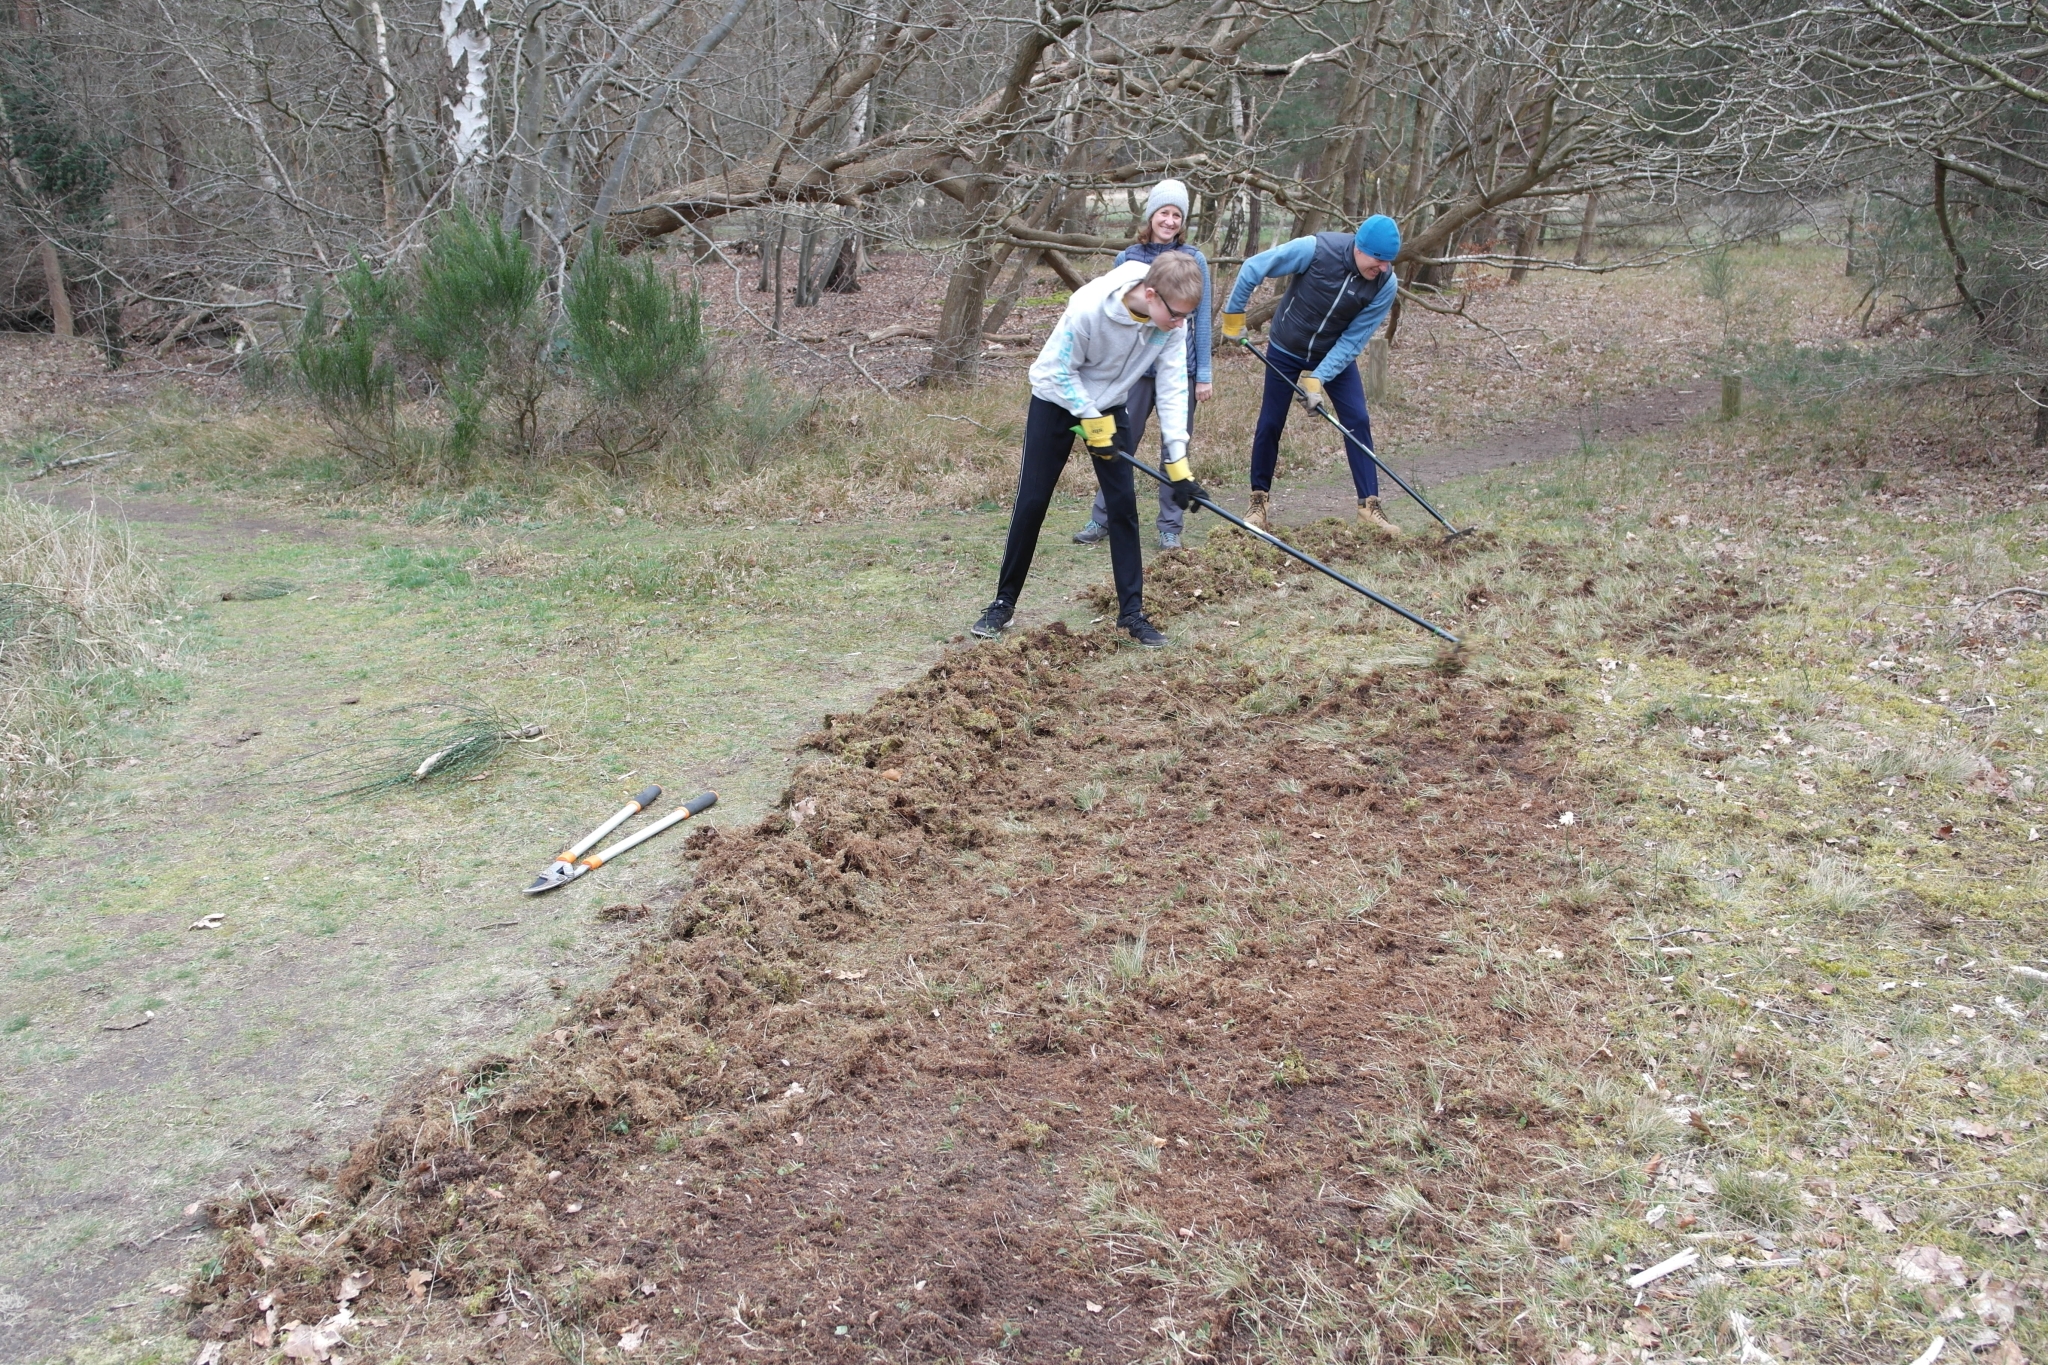 A photo from the FoTF Conservation Event - March 2020 - Habitat Improvement at Quakers Walk, Mildenhall Woods : Volunteers at work improving the habitat